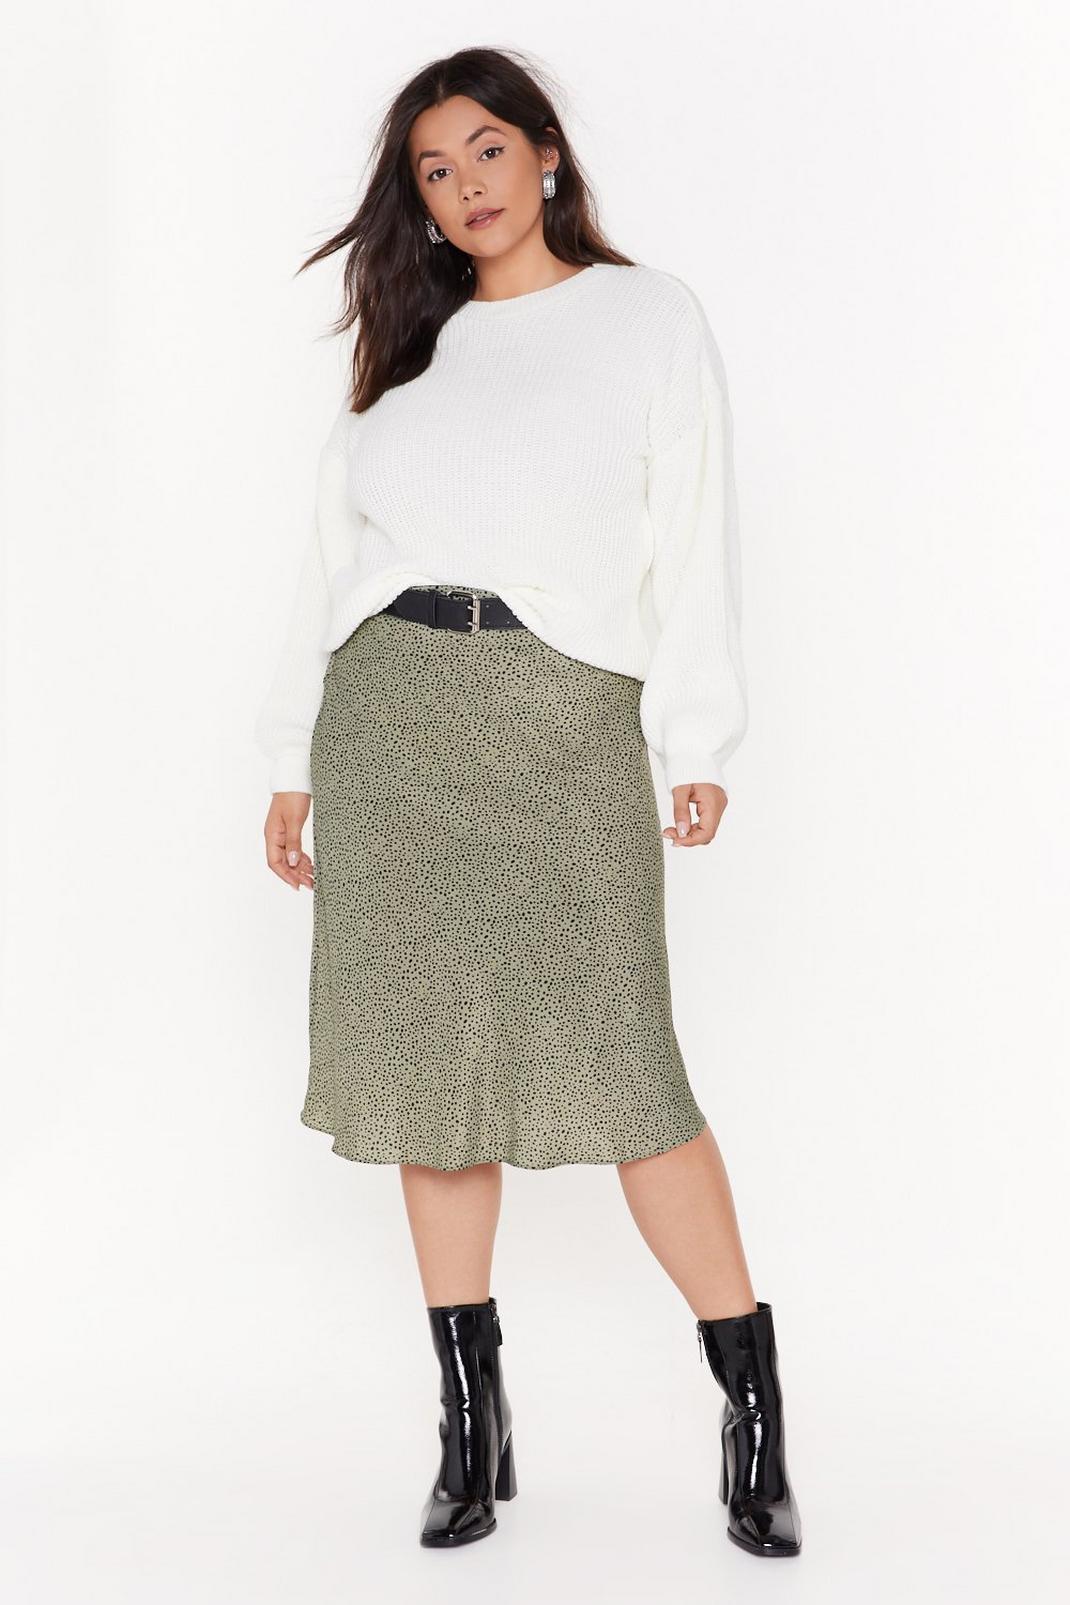 Spot Right Now Babe Plus Midi Skirt image number 1